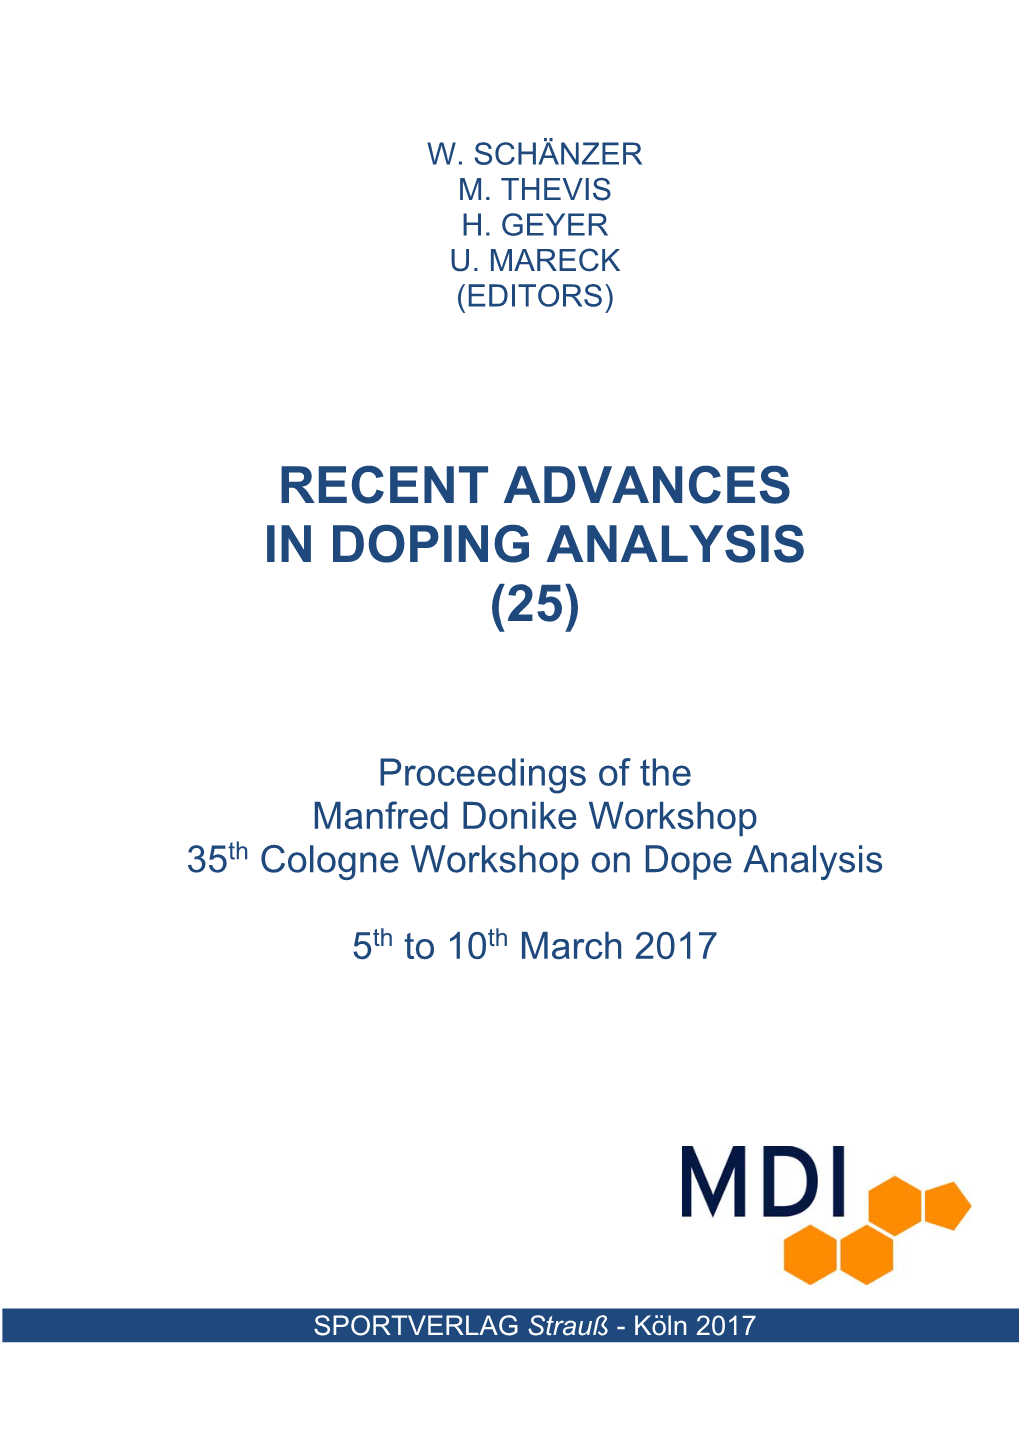 Recent Advances in Doping Analysis (25)